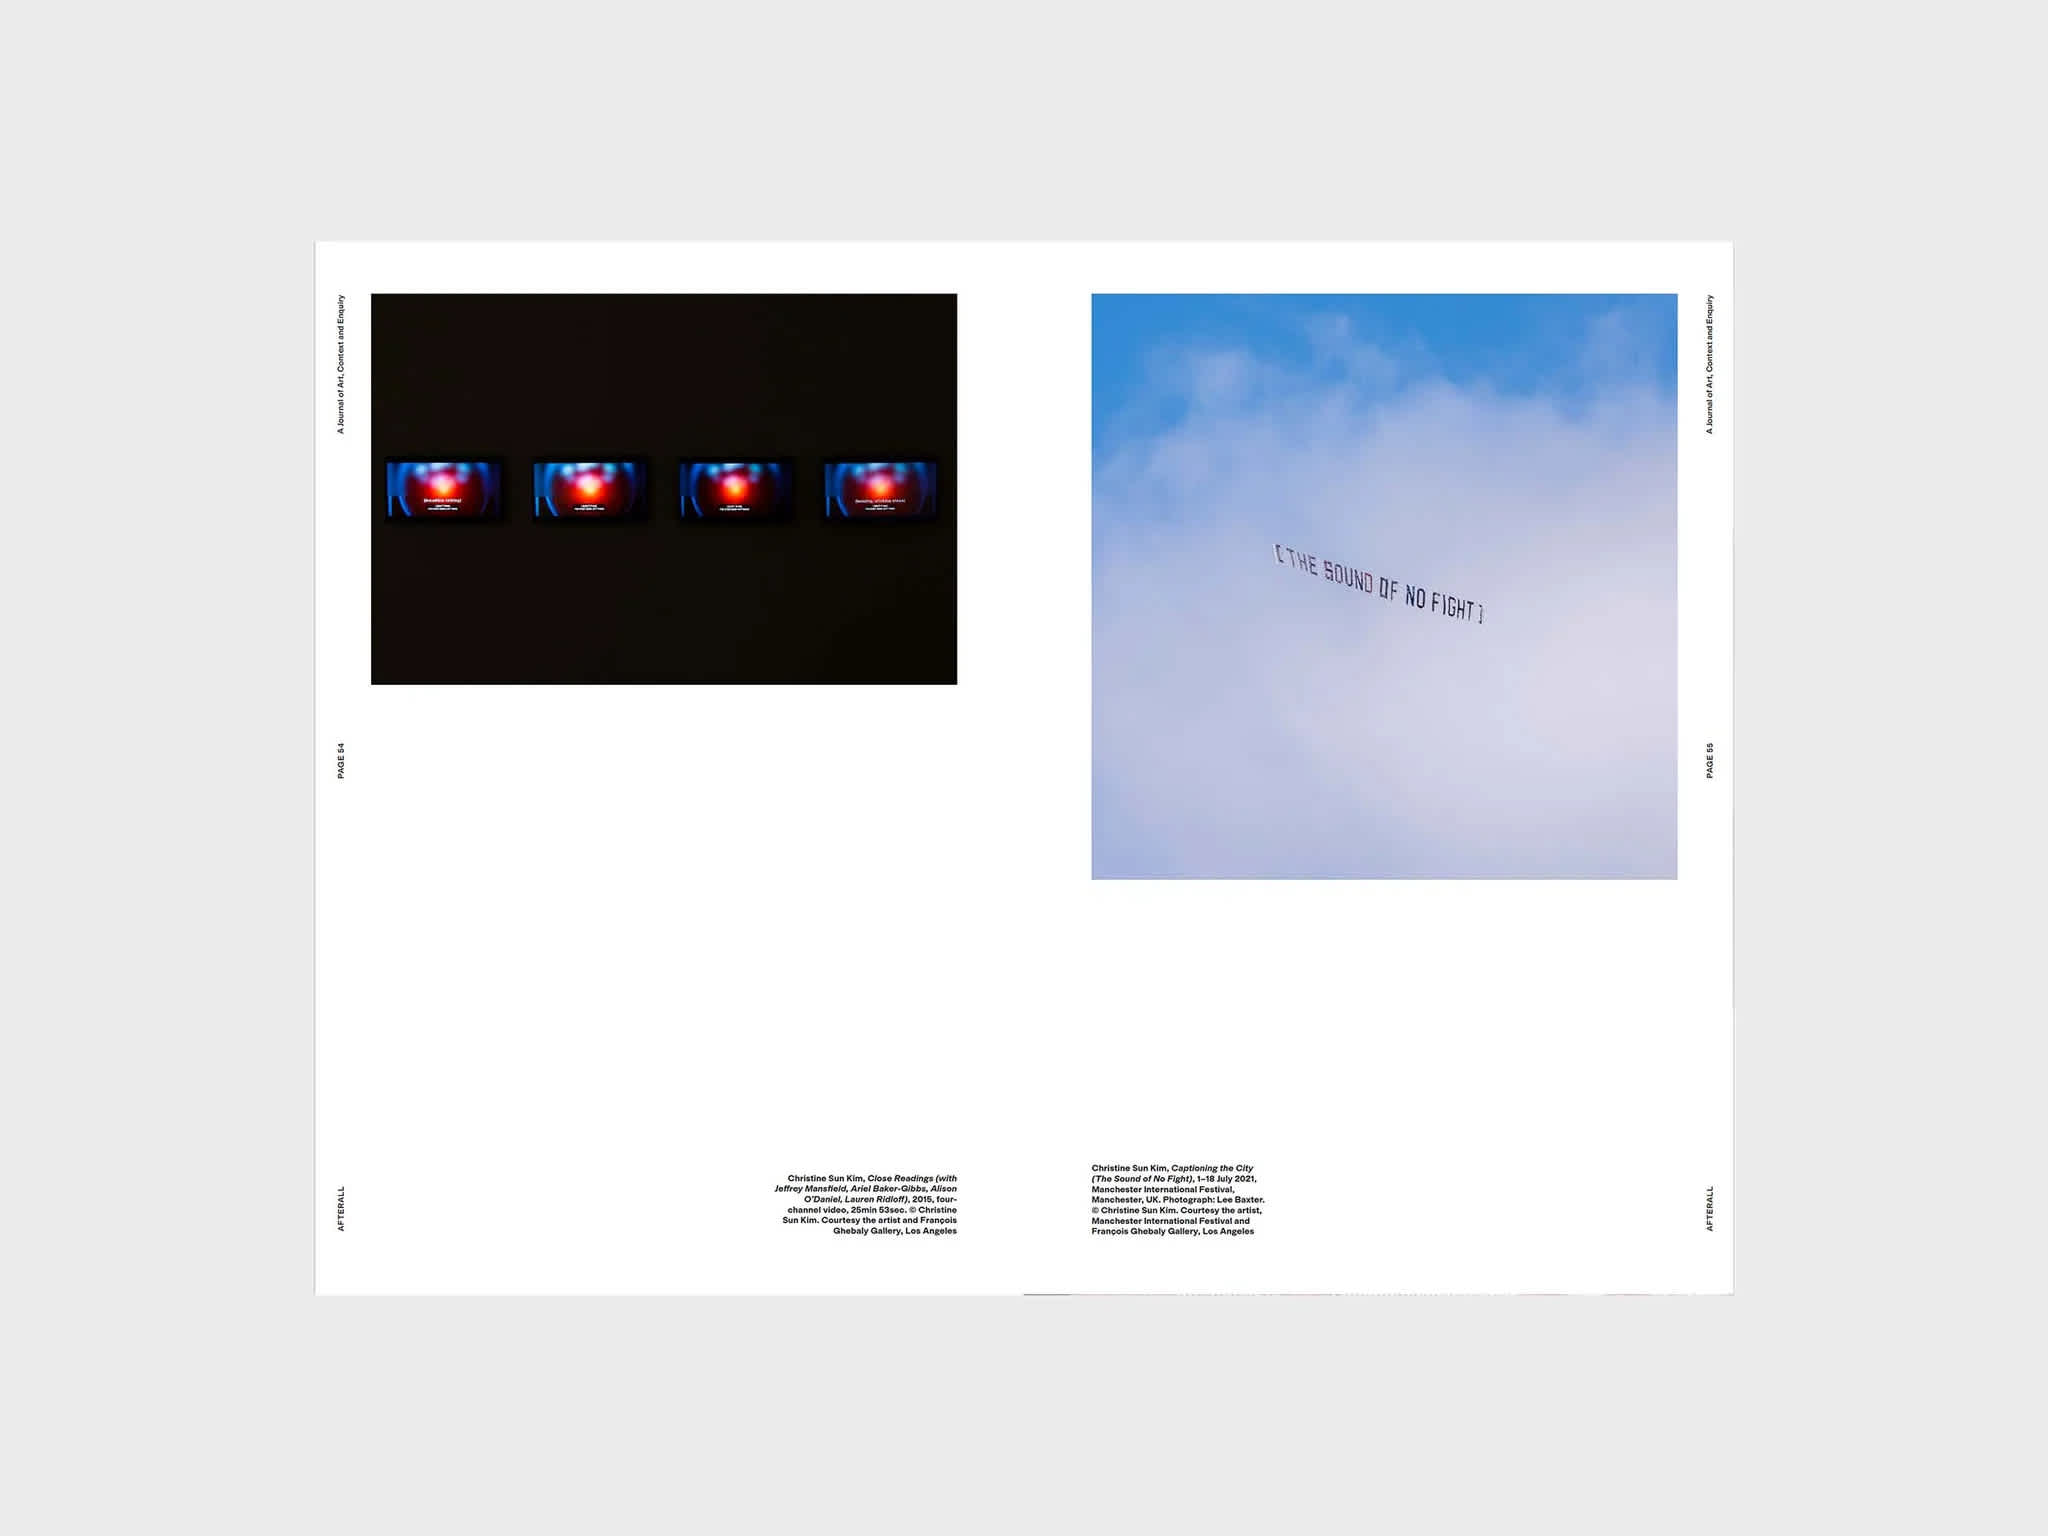 Magazine interior with an image of both the left and right pages. The top third of the left page features a mostly black image with four red and blue screens floating along the center-horizontal line. The right page has a square photo of the sky aligned to the top.